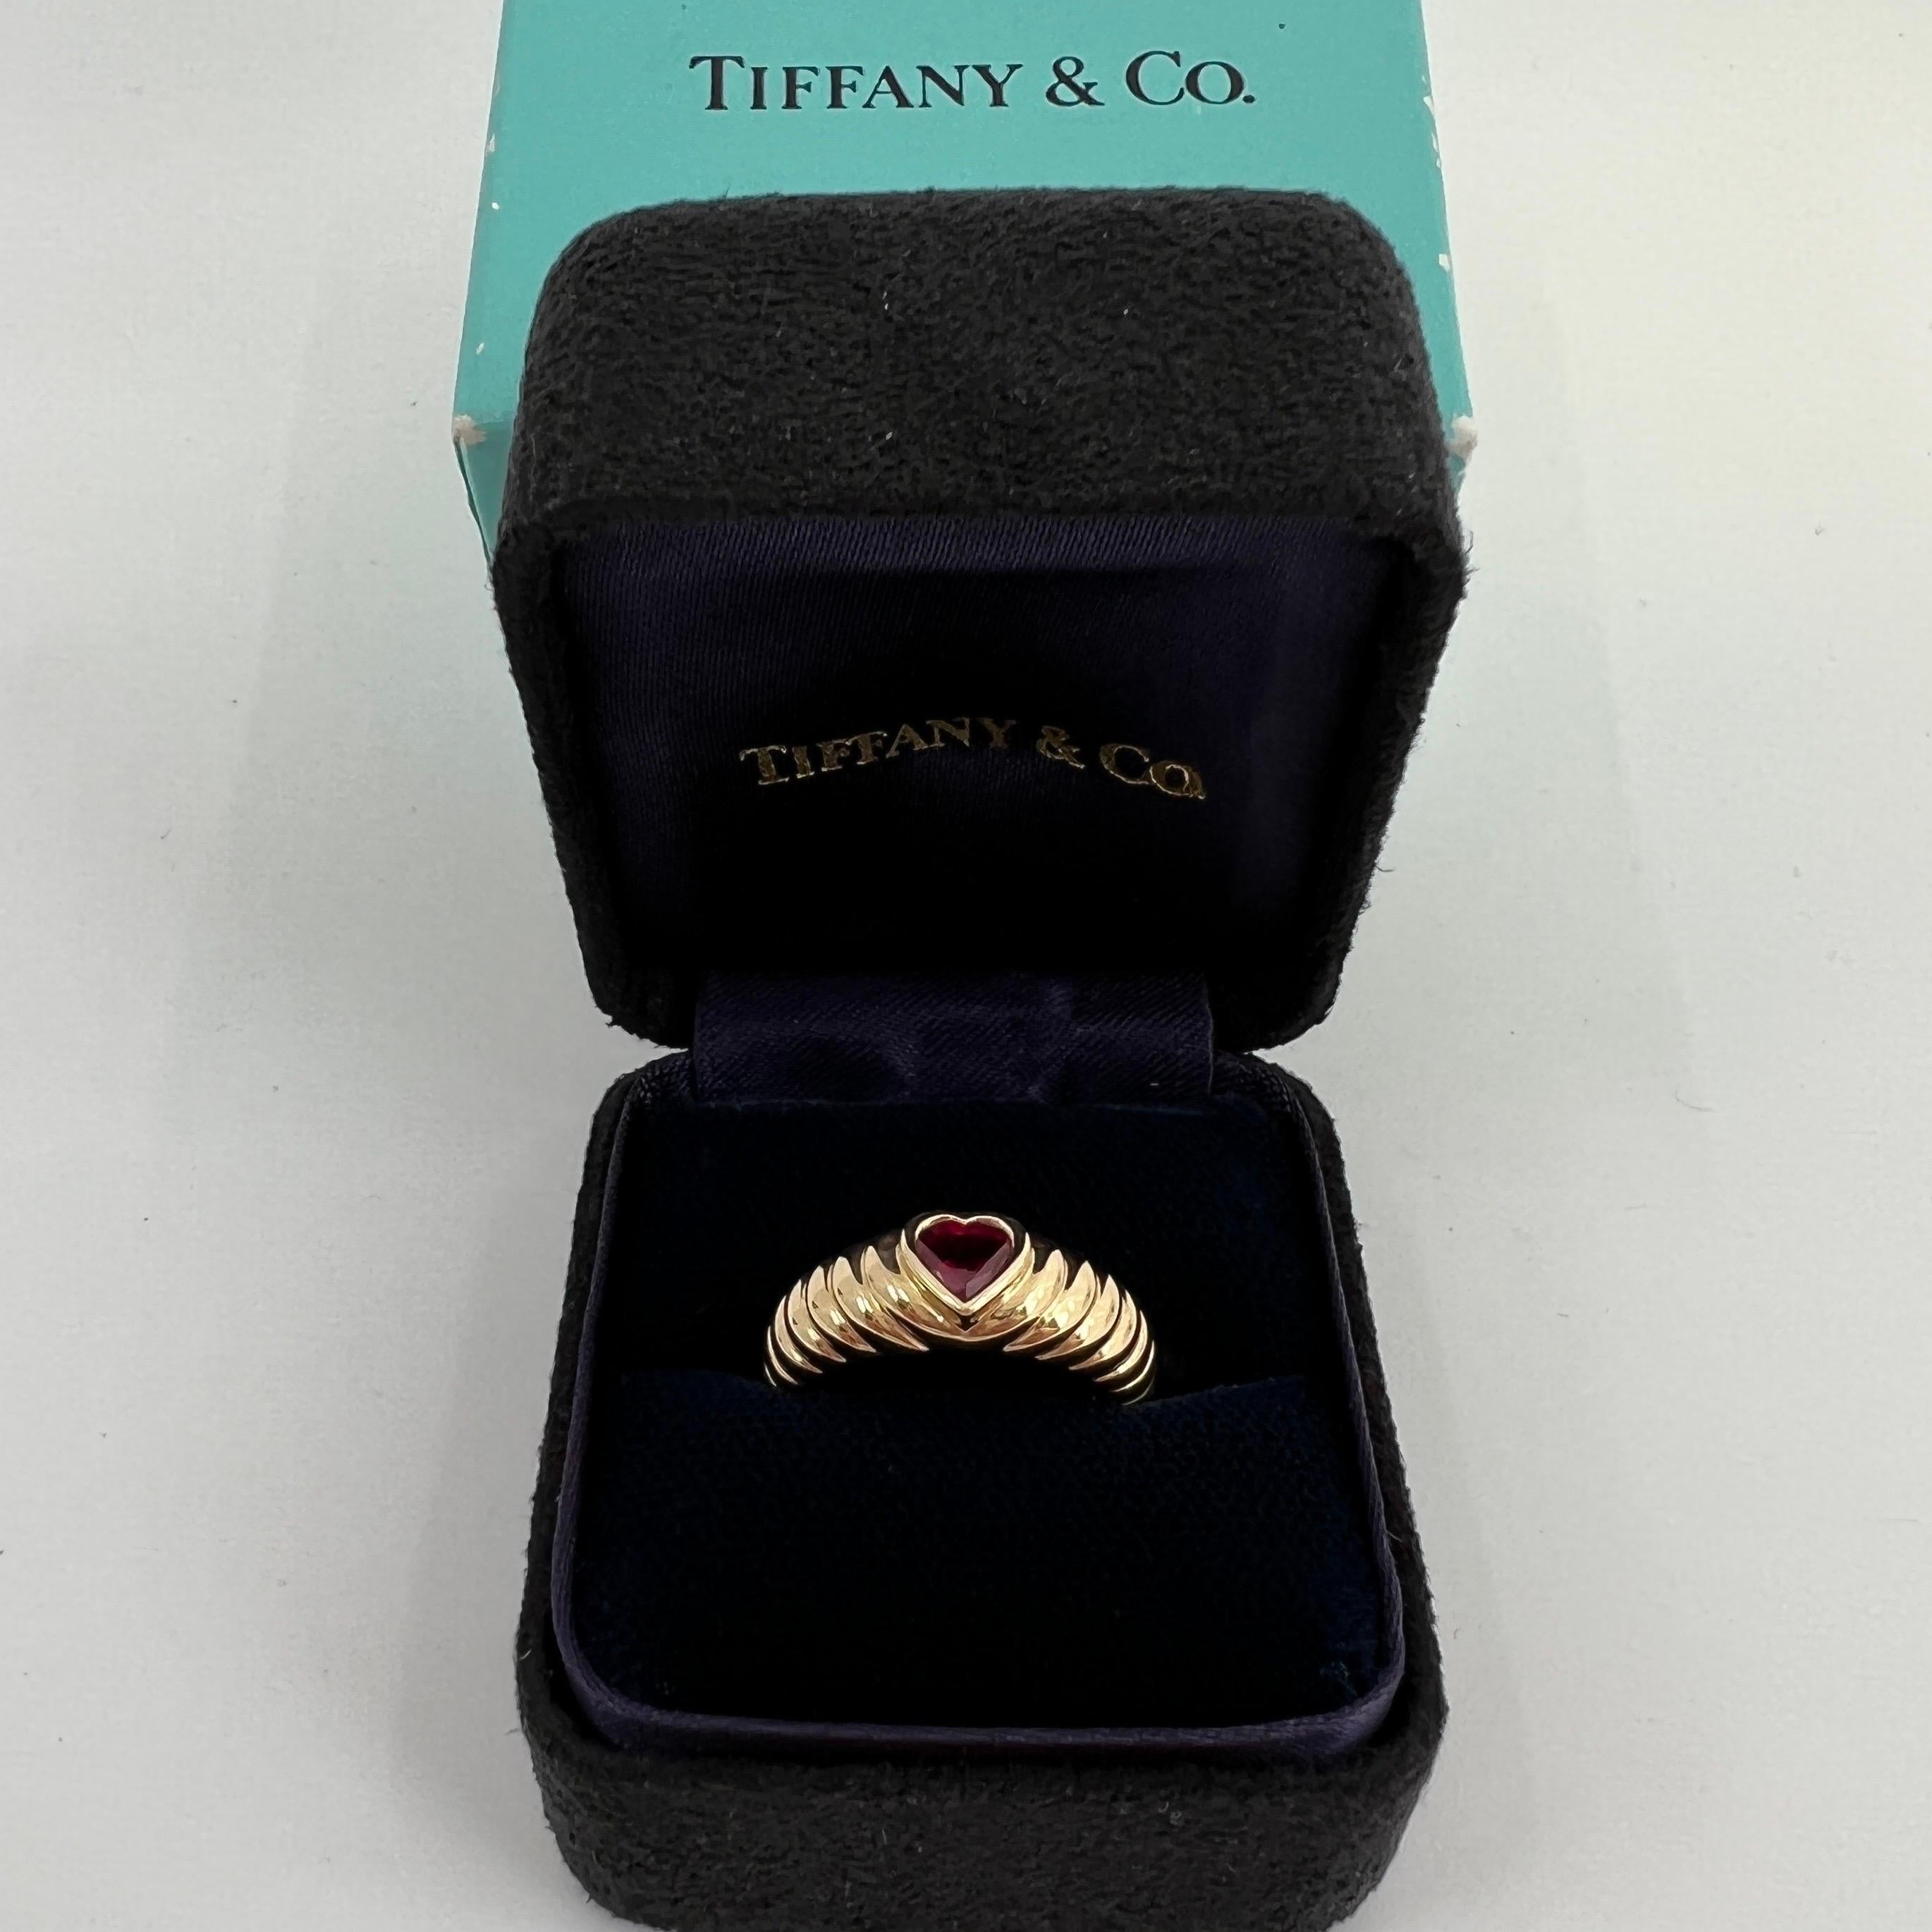 Fine Tiffany & Co. Vivid Blood Red Ruby Heart Cut 18k Yellow Gold Band Ring 5